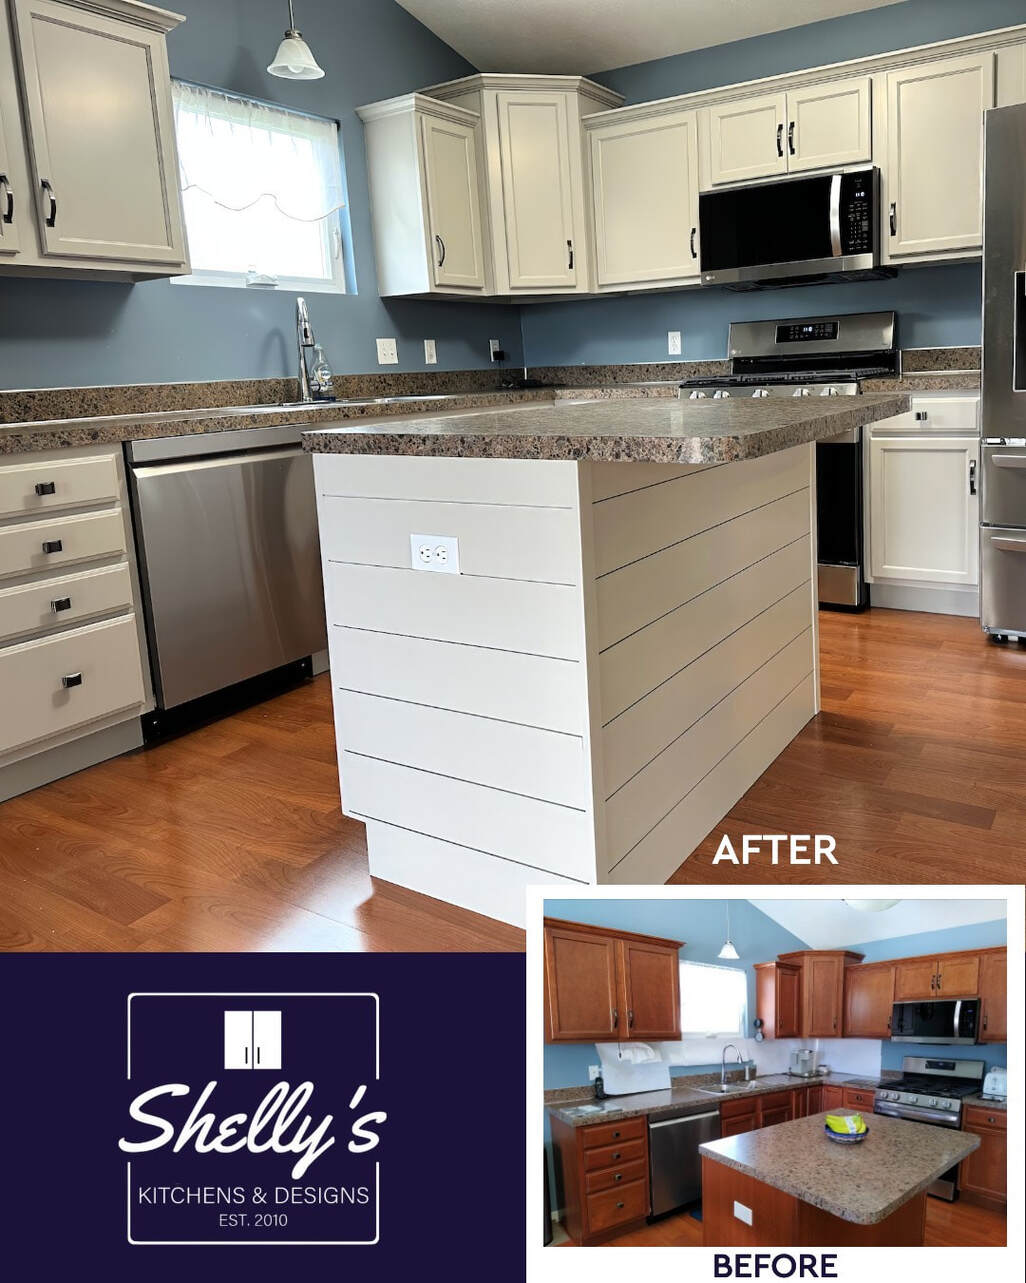 Kitchen remodel, before and after kitchen cabinet painting, before and after kitchen cabinet refinishing, shelly’s kitchens, kitchen cabinet painting, kitchen cabinet refinishing, cabinet painters near me, cabinet refinishers near me, 